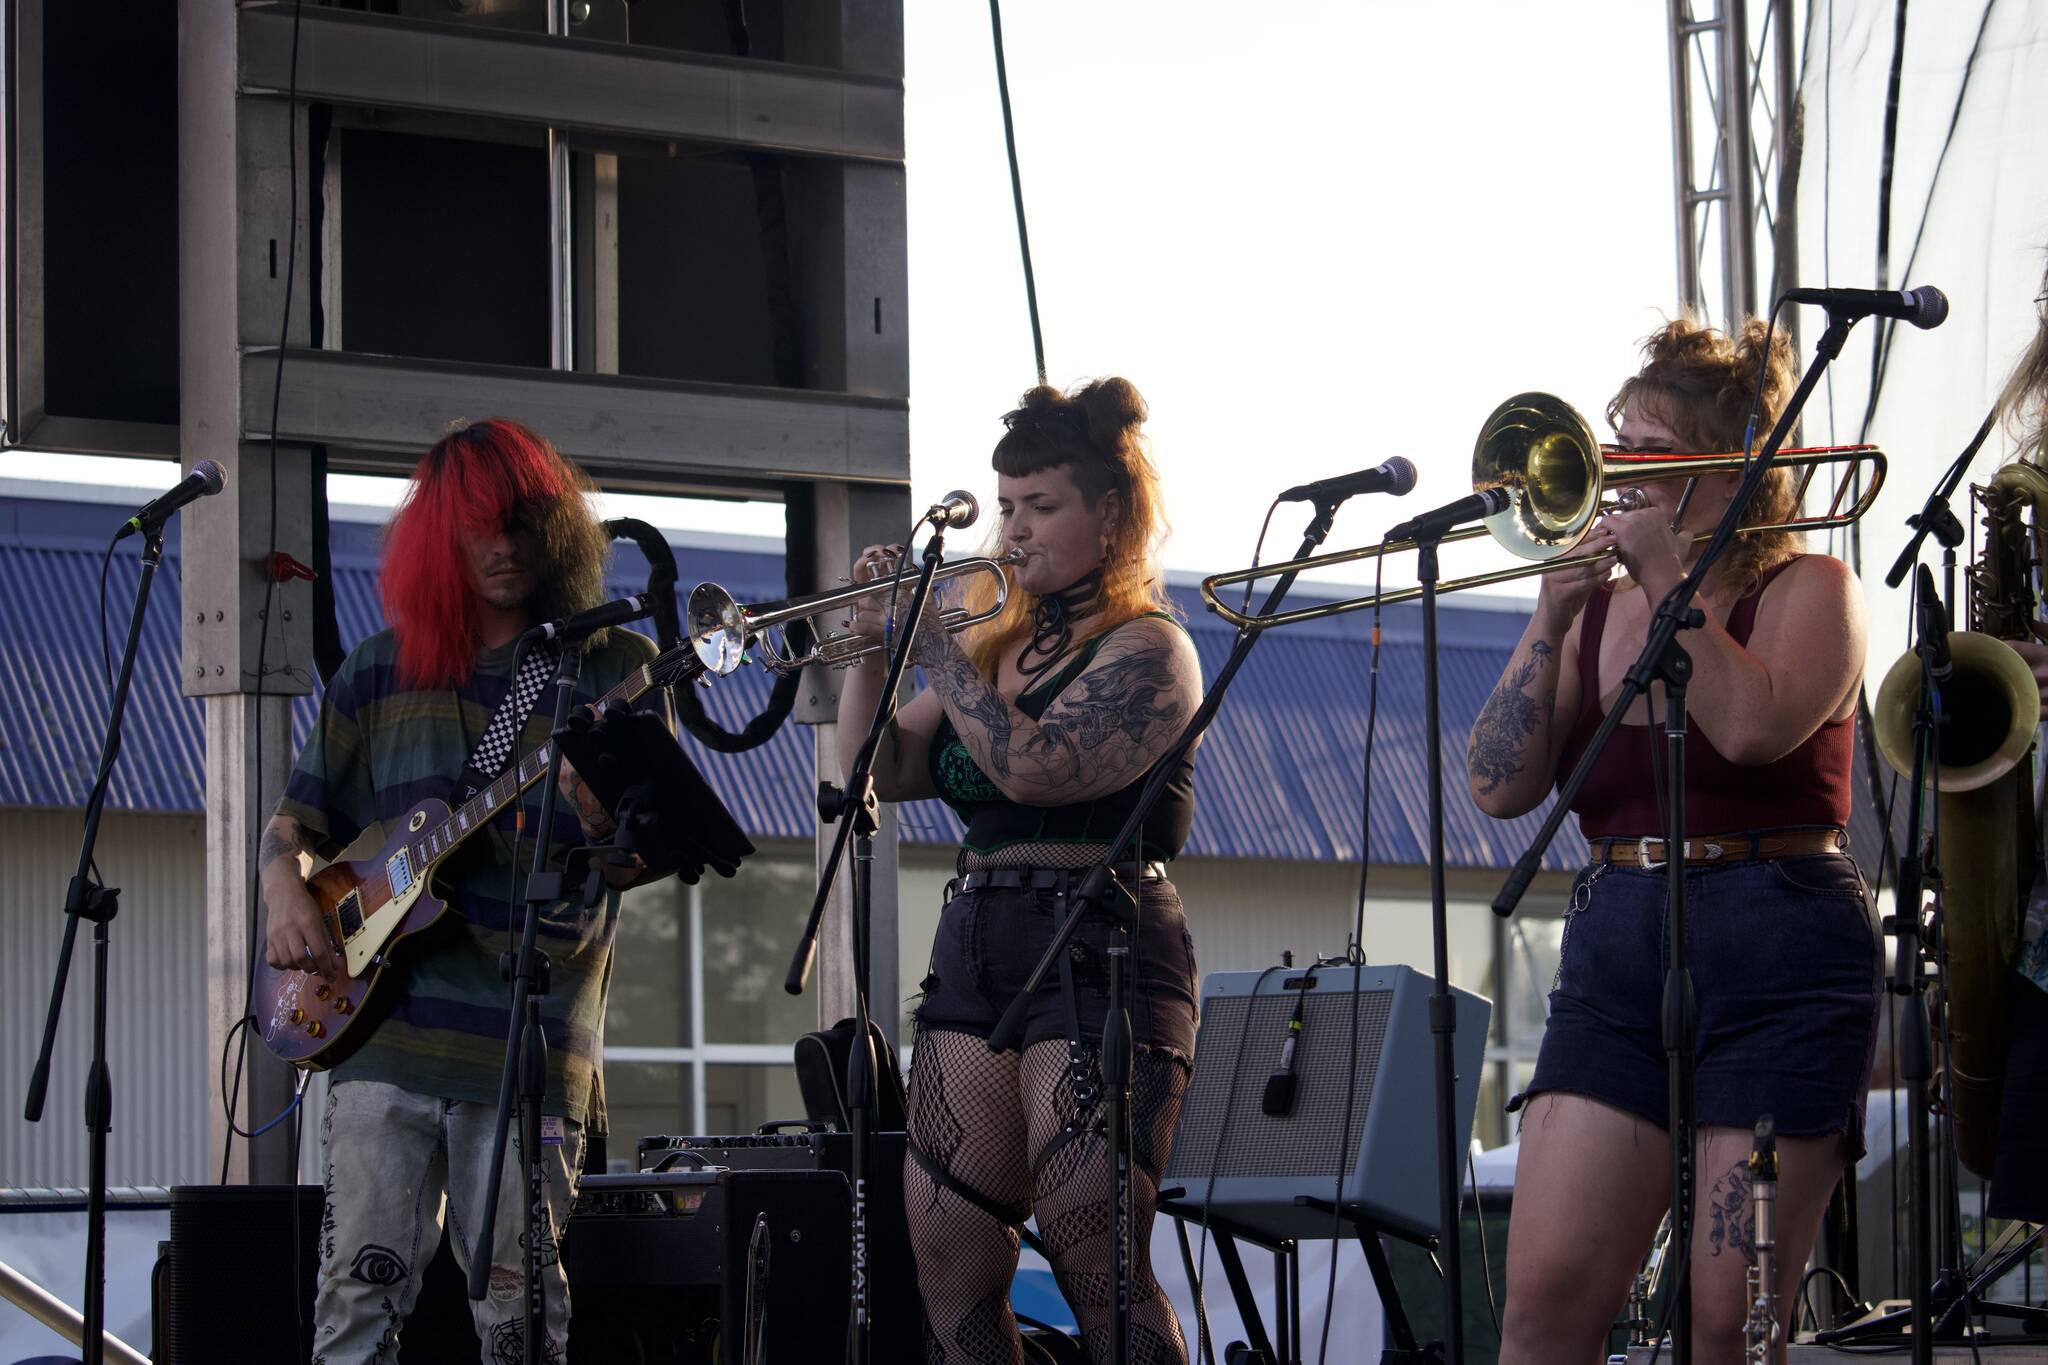 Simple Minded Symphony, a ska band from Oak Harbor, played the Oak Harbor Music Festival on Friday. (Photo by Rachel Rosen/Whidbey News-Times)